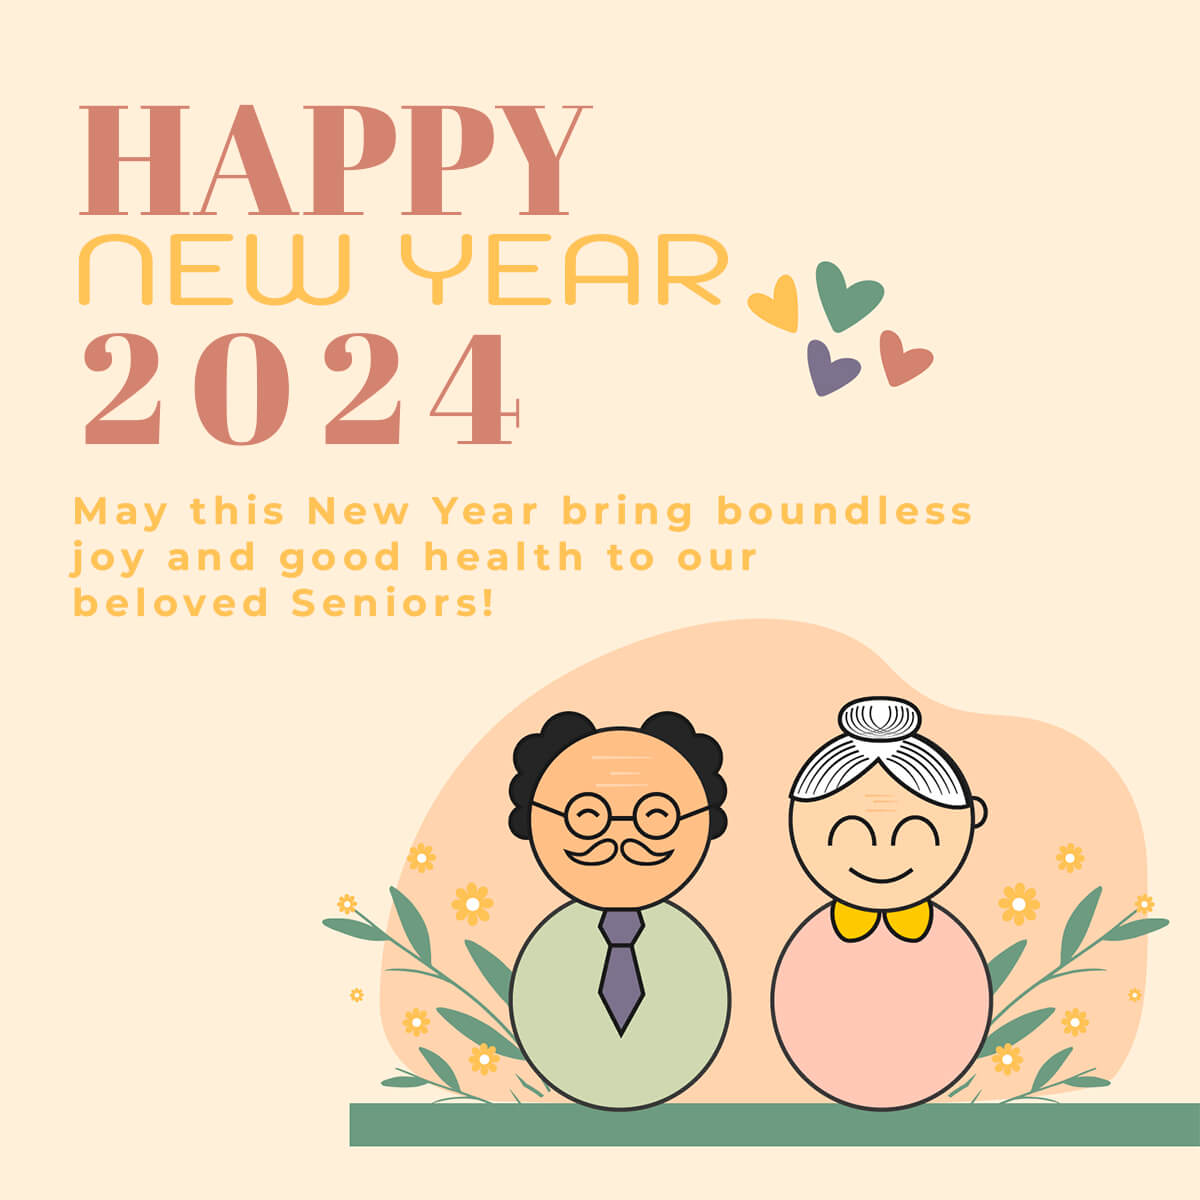 Happy New Year 2024 Wishes For Elders